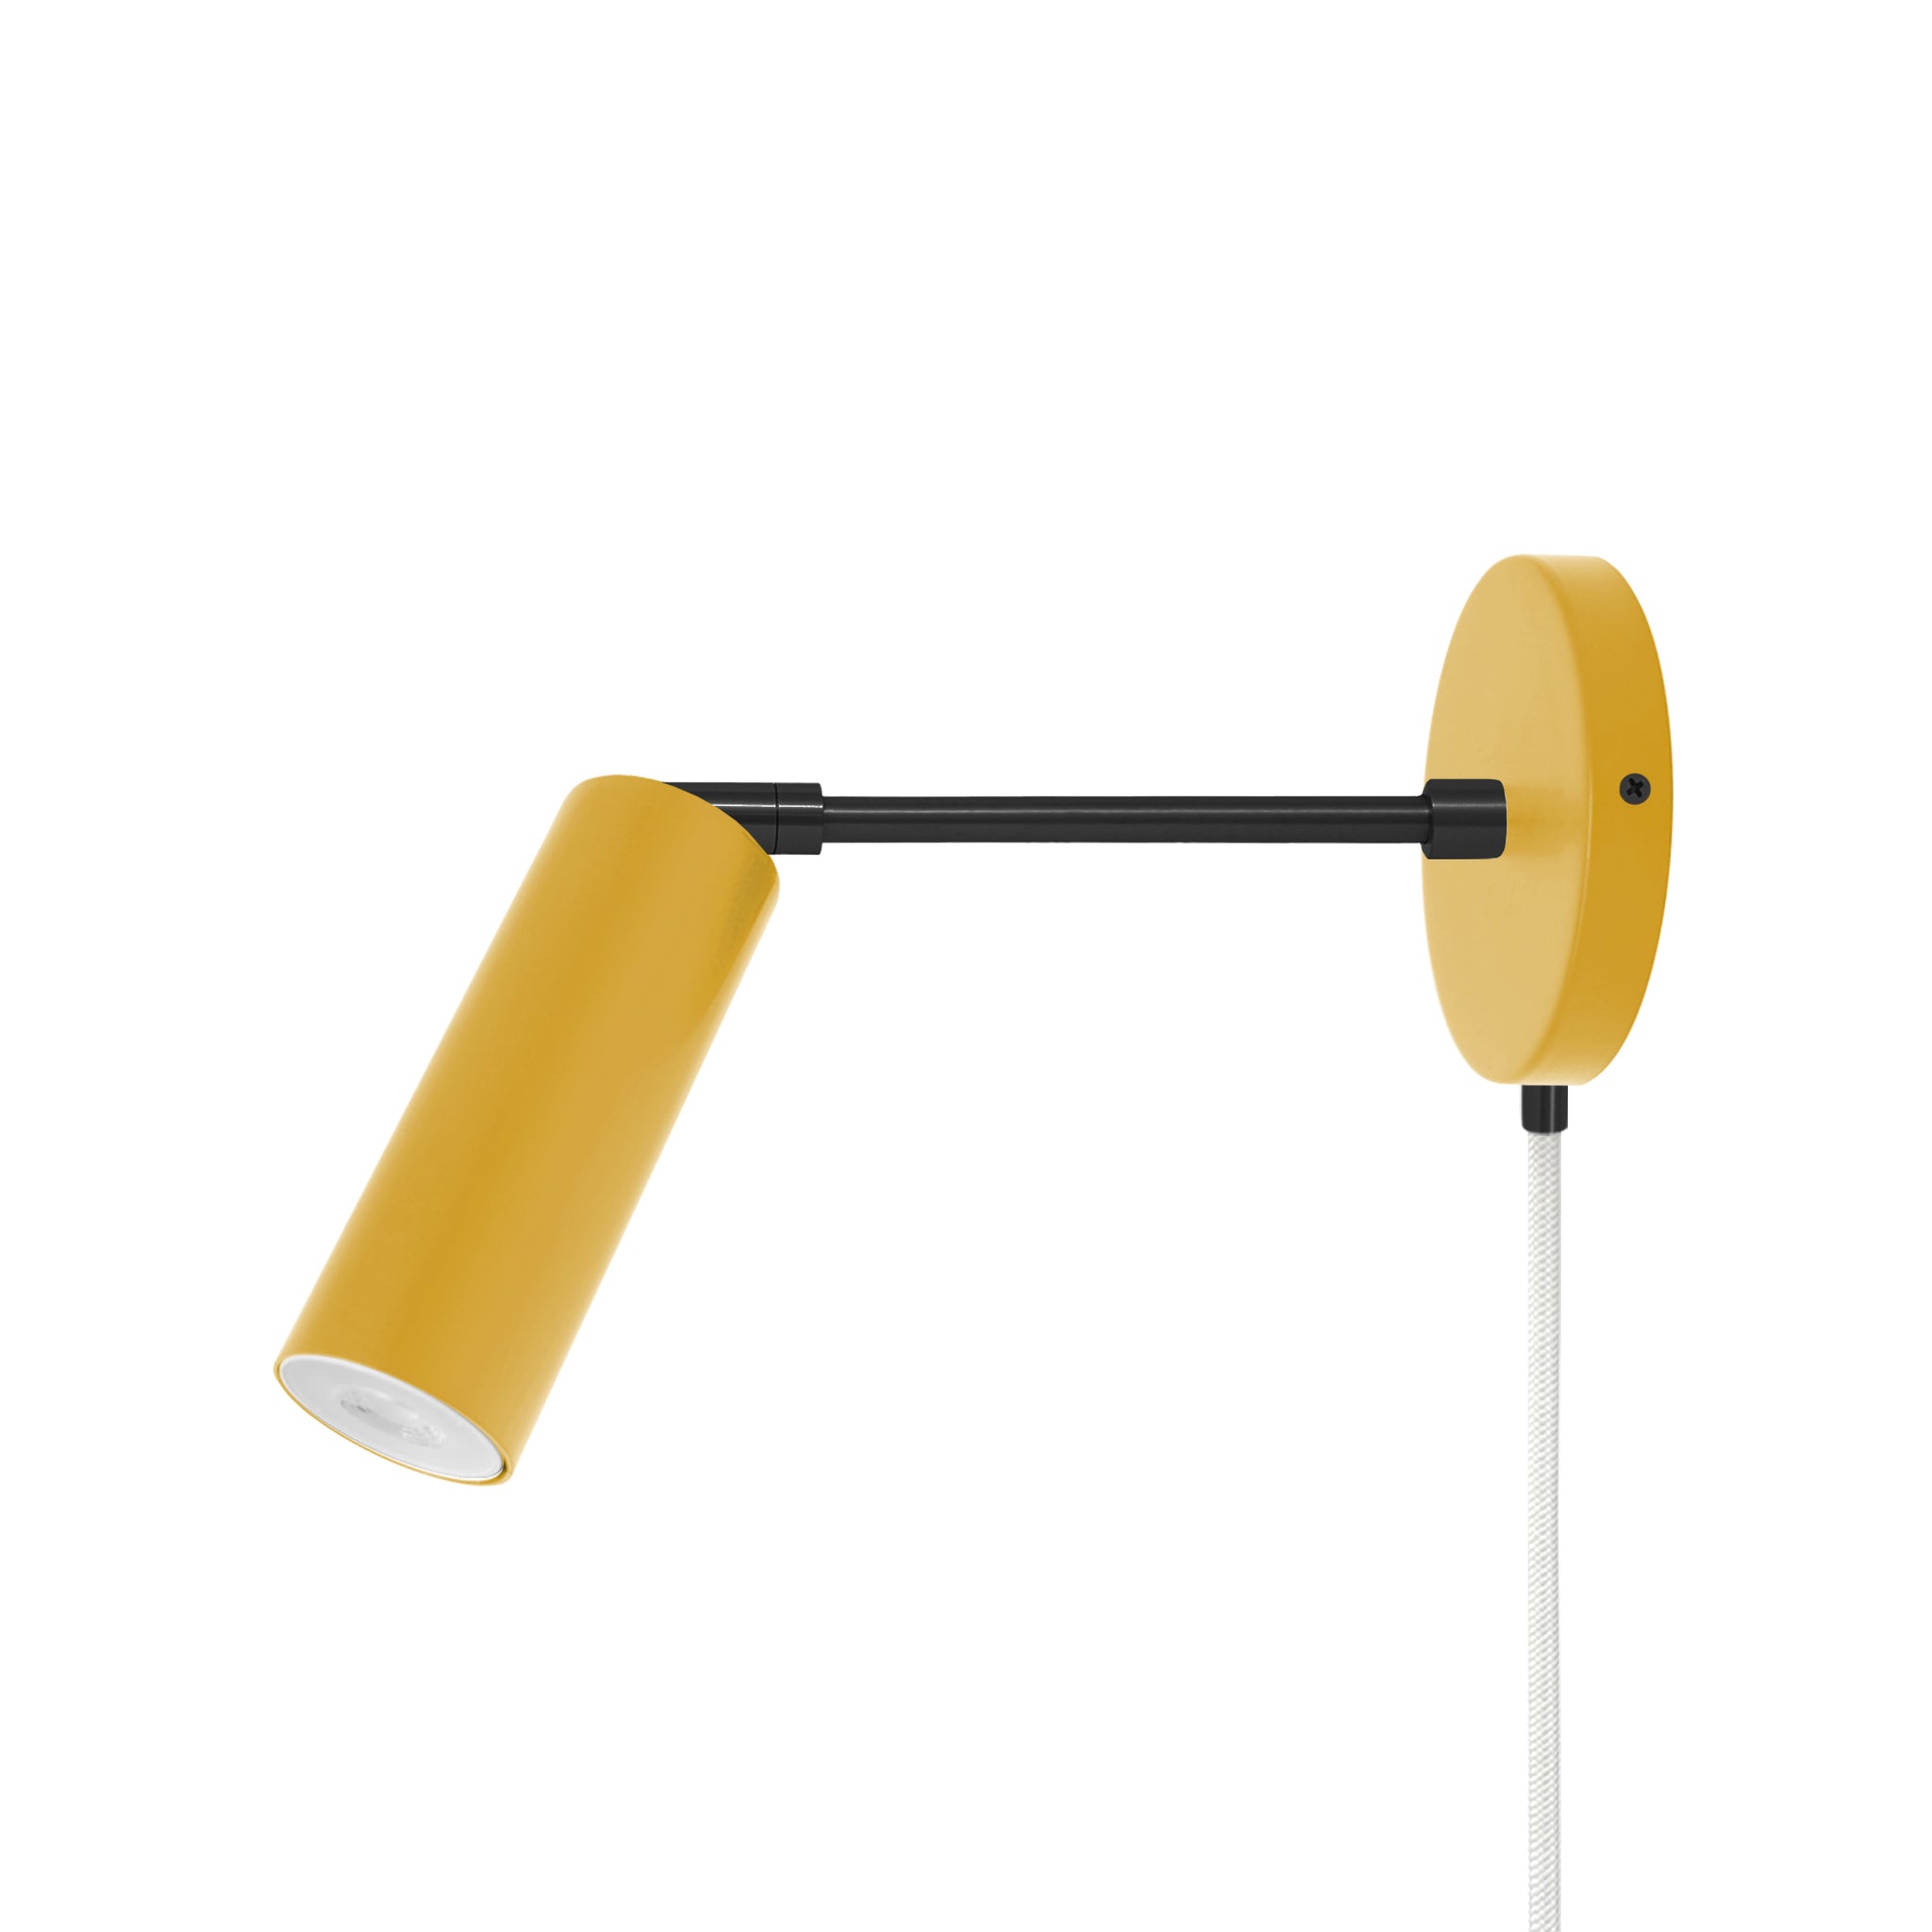 Black and ochre color Reader plug-in sconce 6" arm Dutton Brown lighting